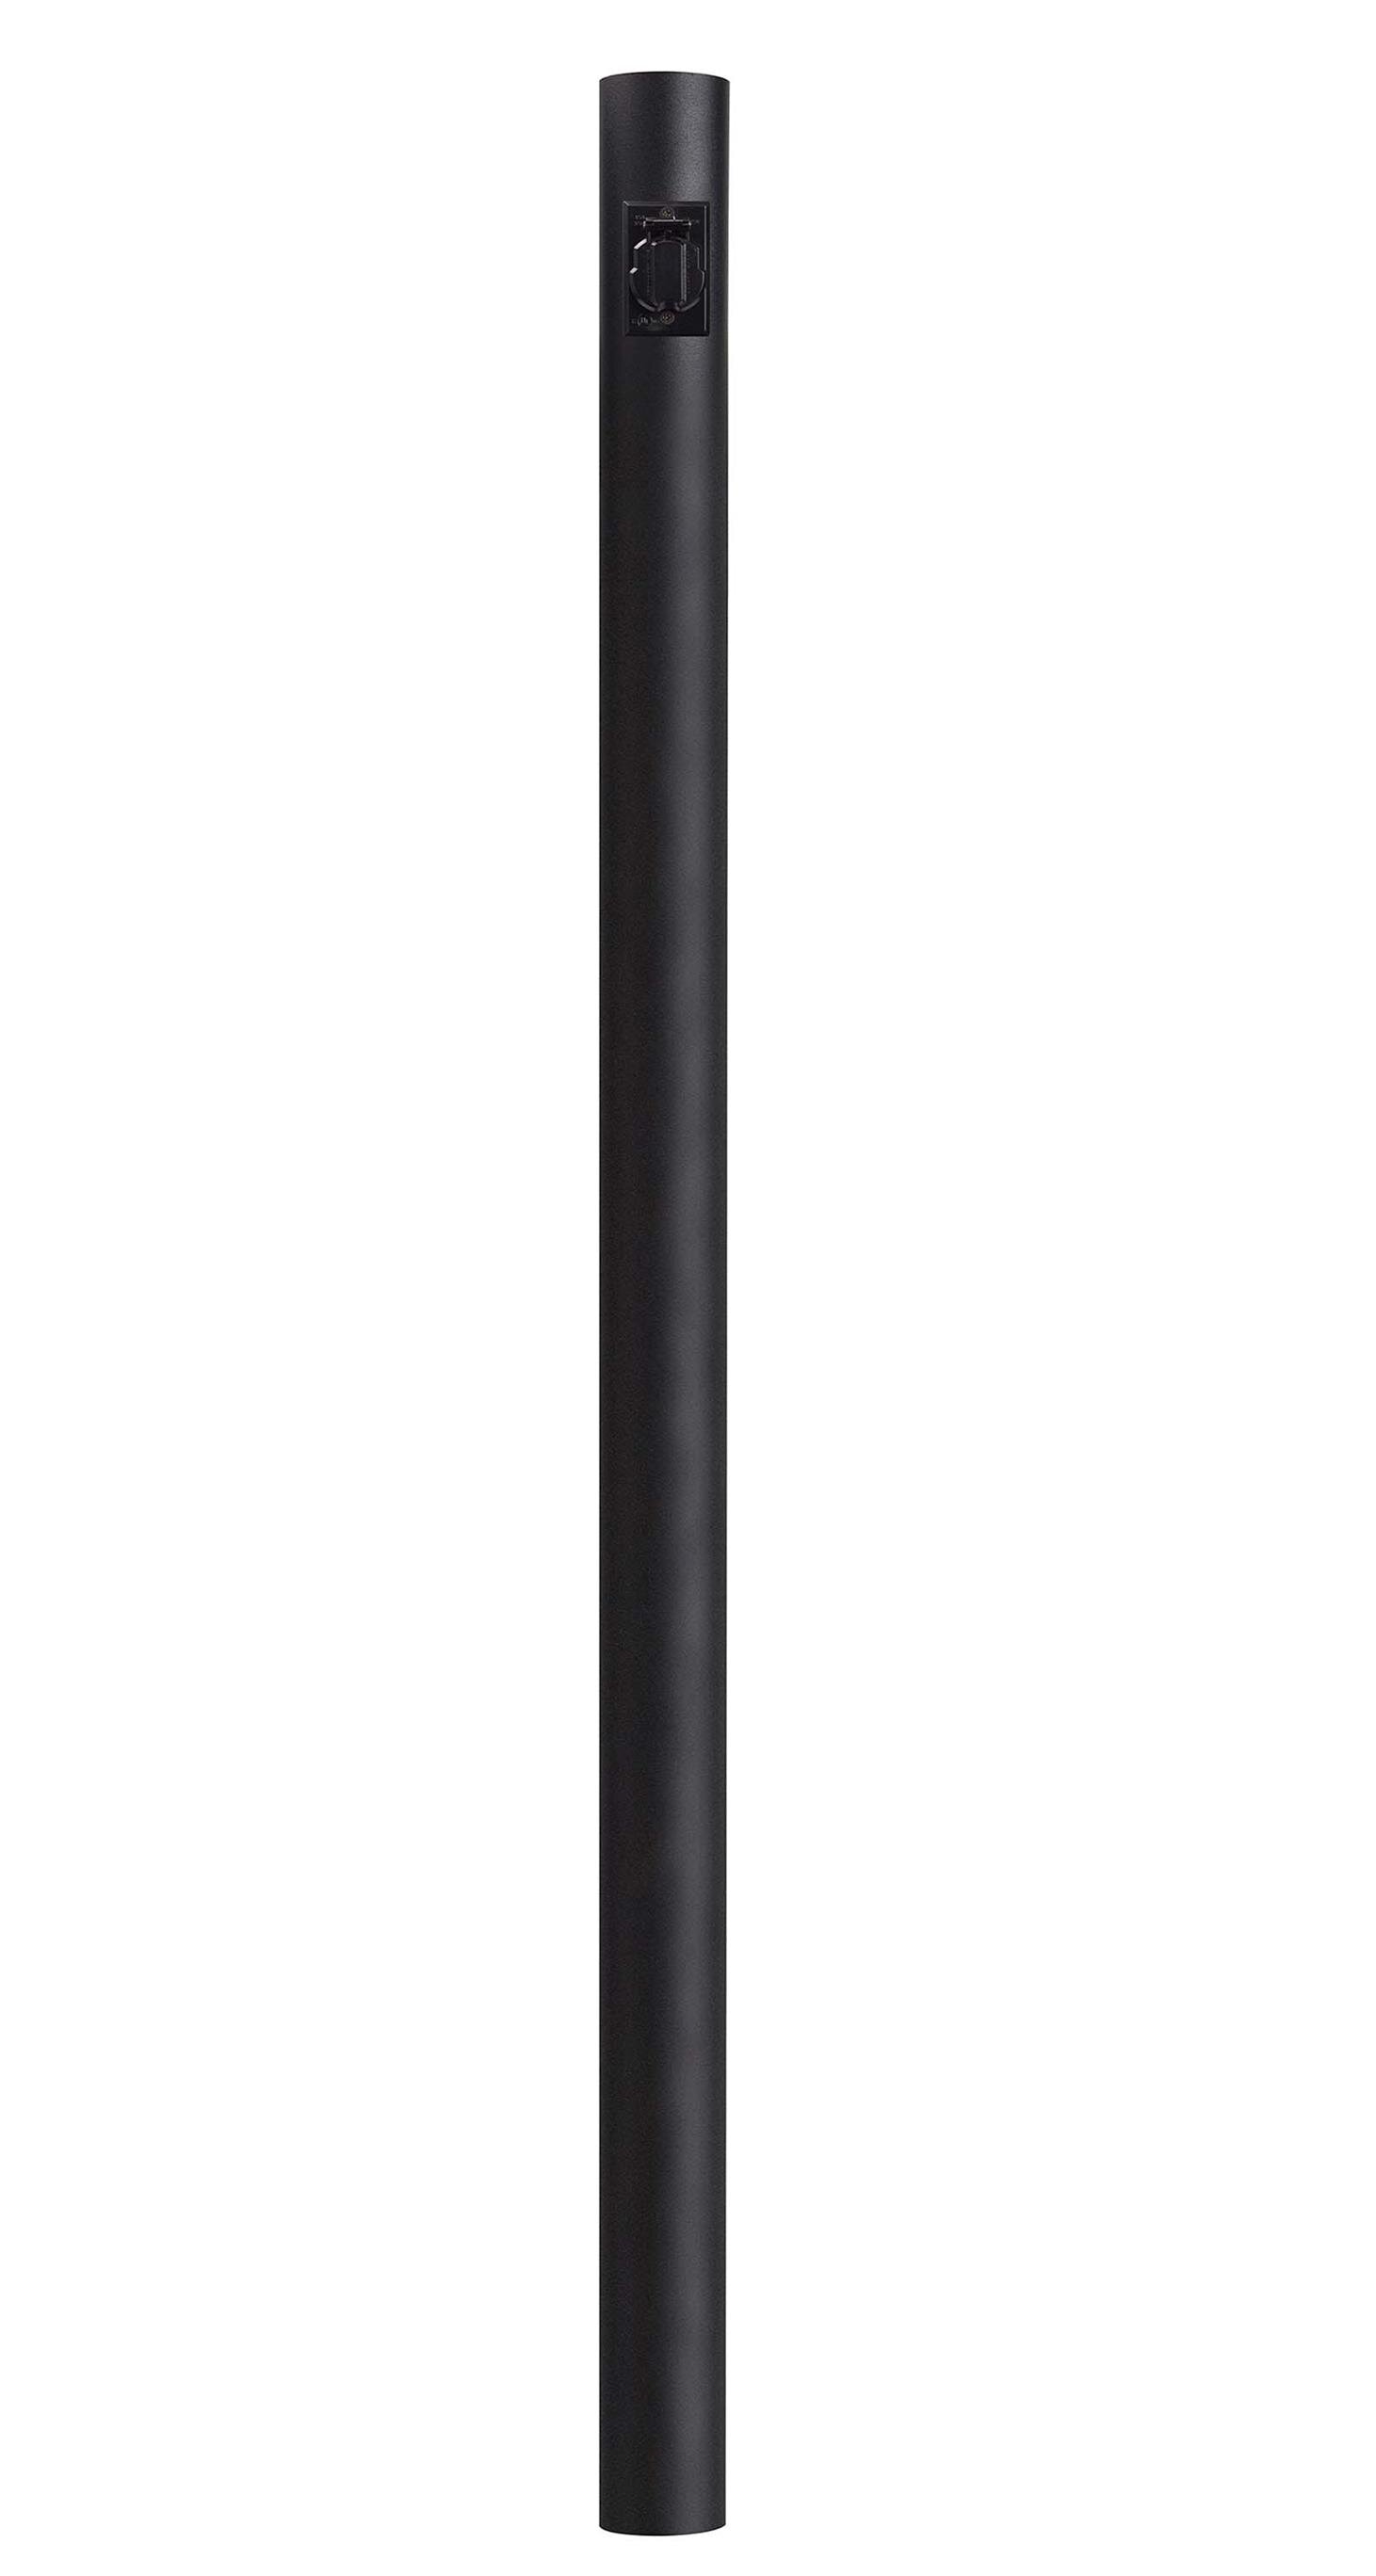 Solus Direct Burial Aluminum Lamp Post, Fits Most Standard 3 Post Top  Fixtures, Includes Convenience Outlet and Inlet Hole